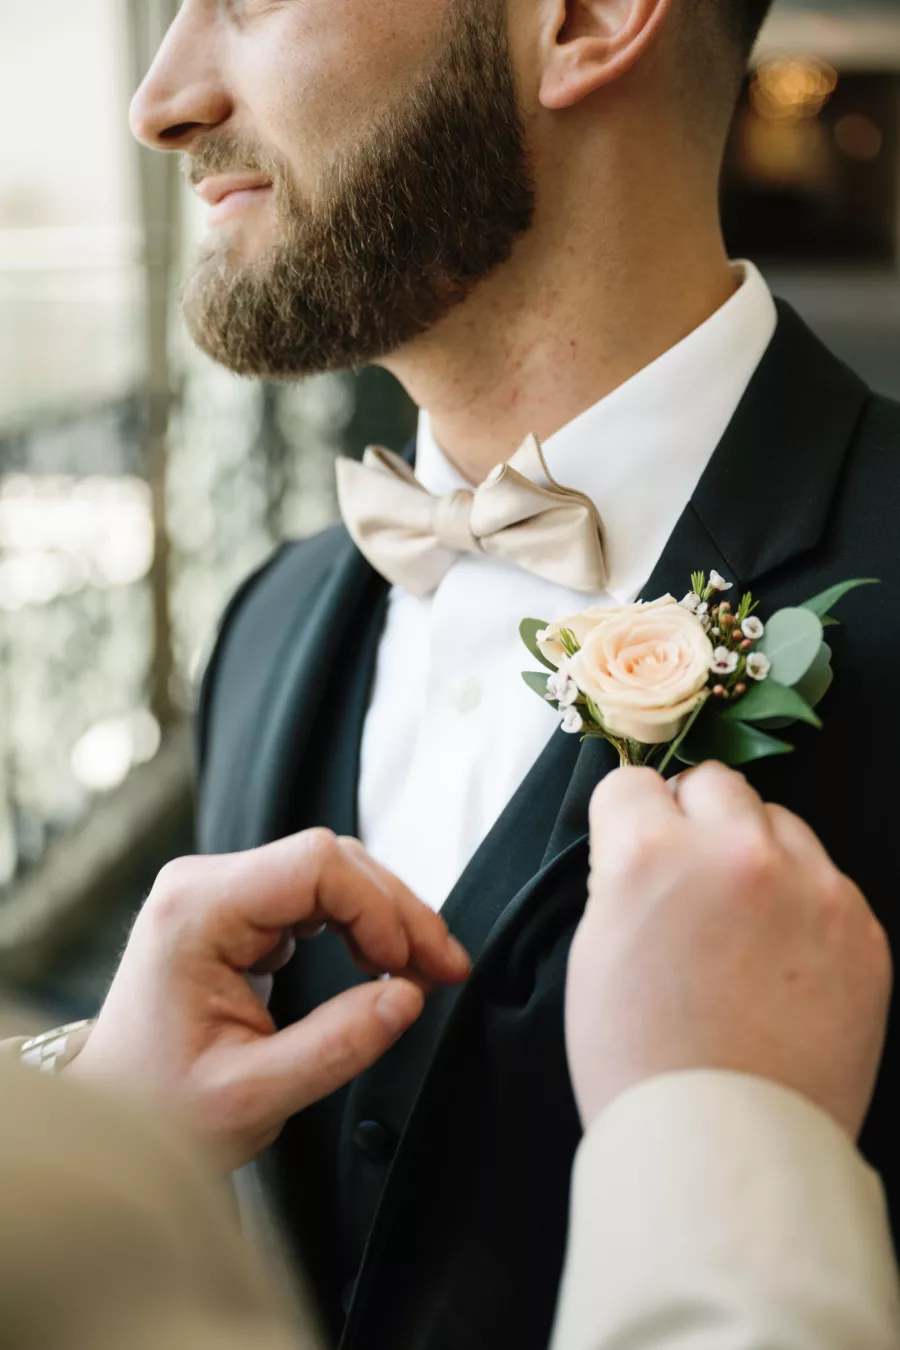 Blush Pink Rose, Wax Flower, and Greenery Wedding Boutonniere Ideas | Tampa Bay Florist Marigold Flower Co